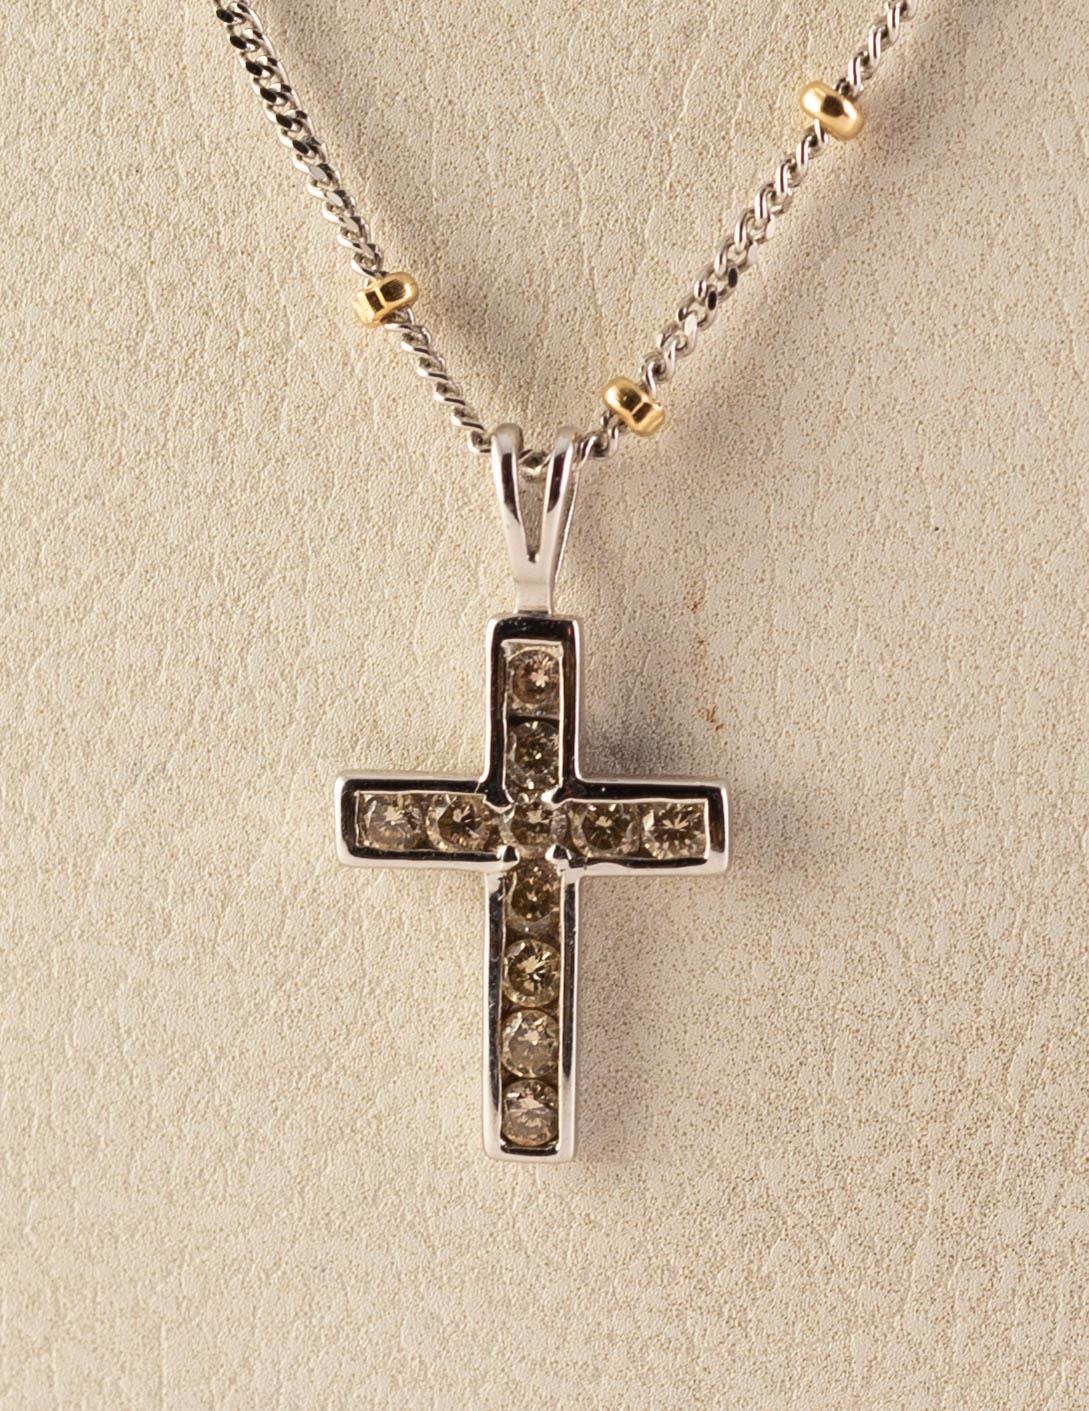 18ct WHITE GOLD TINY DIAMOND SET CRUCIFIX PENDANT on an 18ct WHTIE AND YELLOW GOLD FINE CHAIN - Image 2 of 3